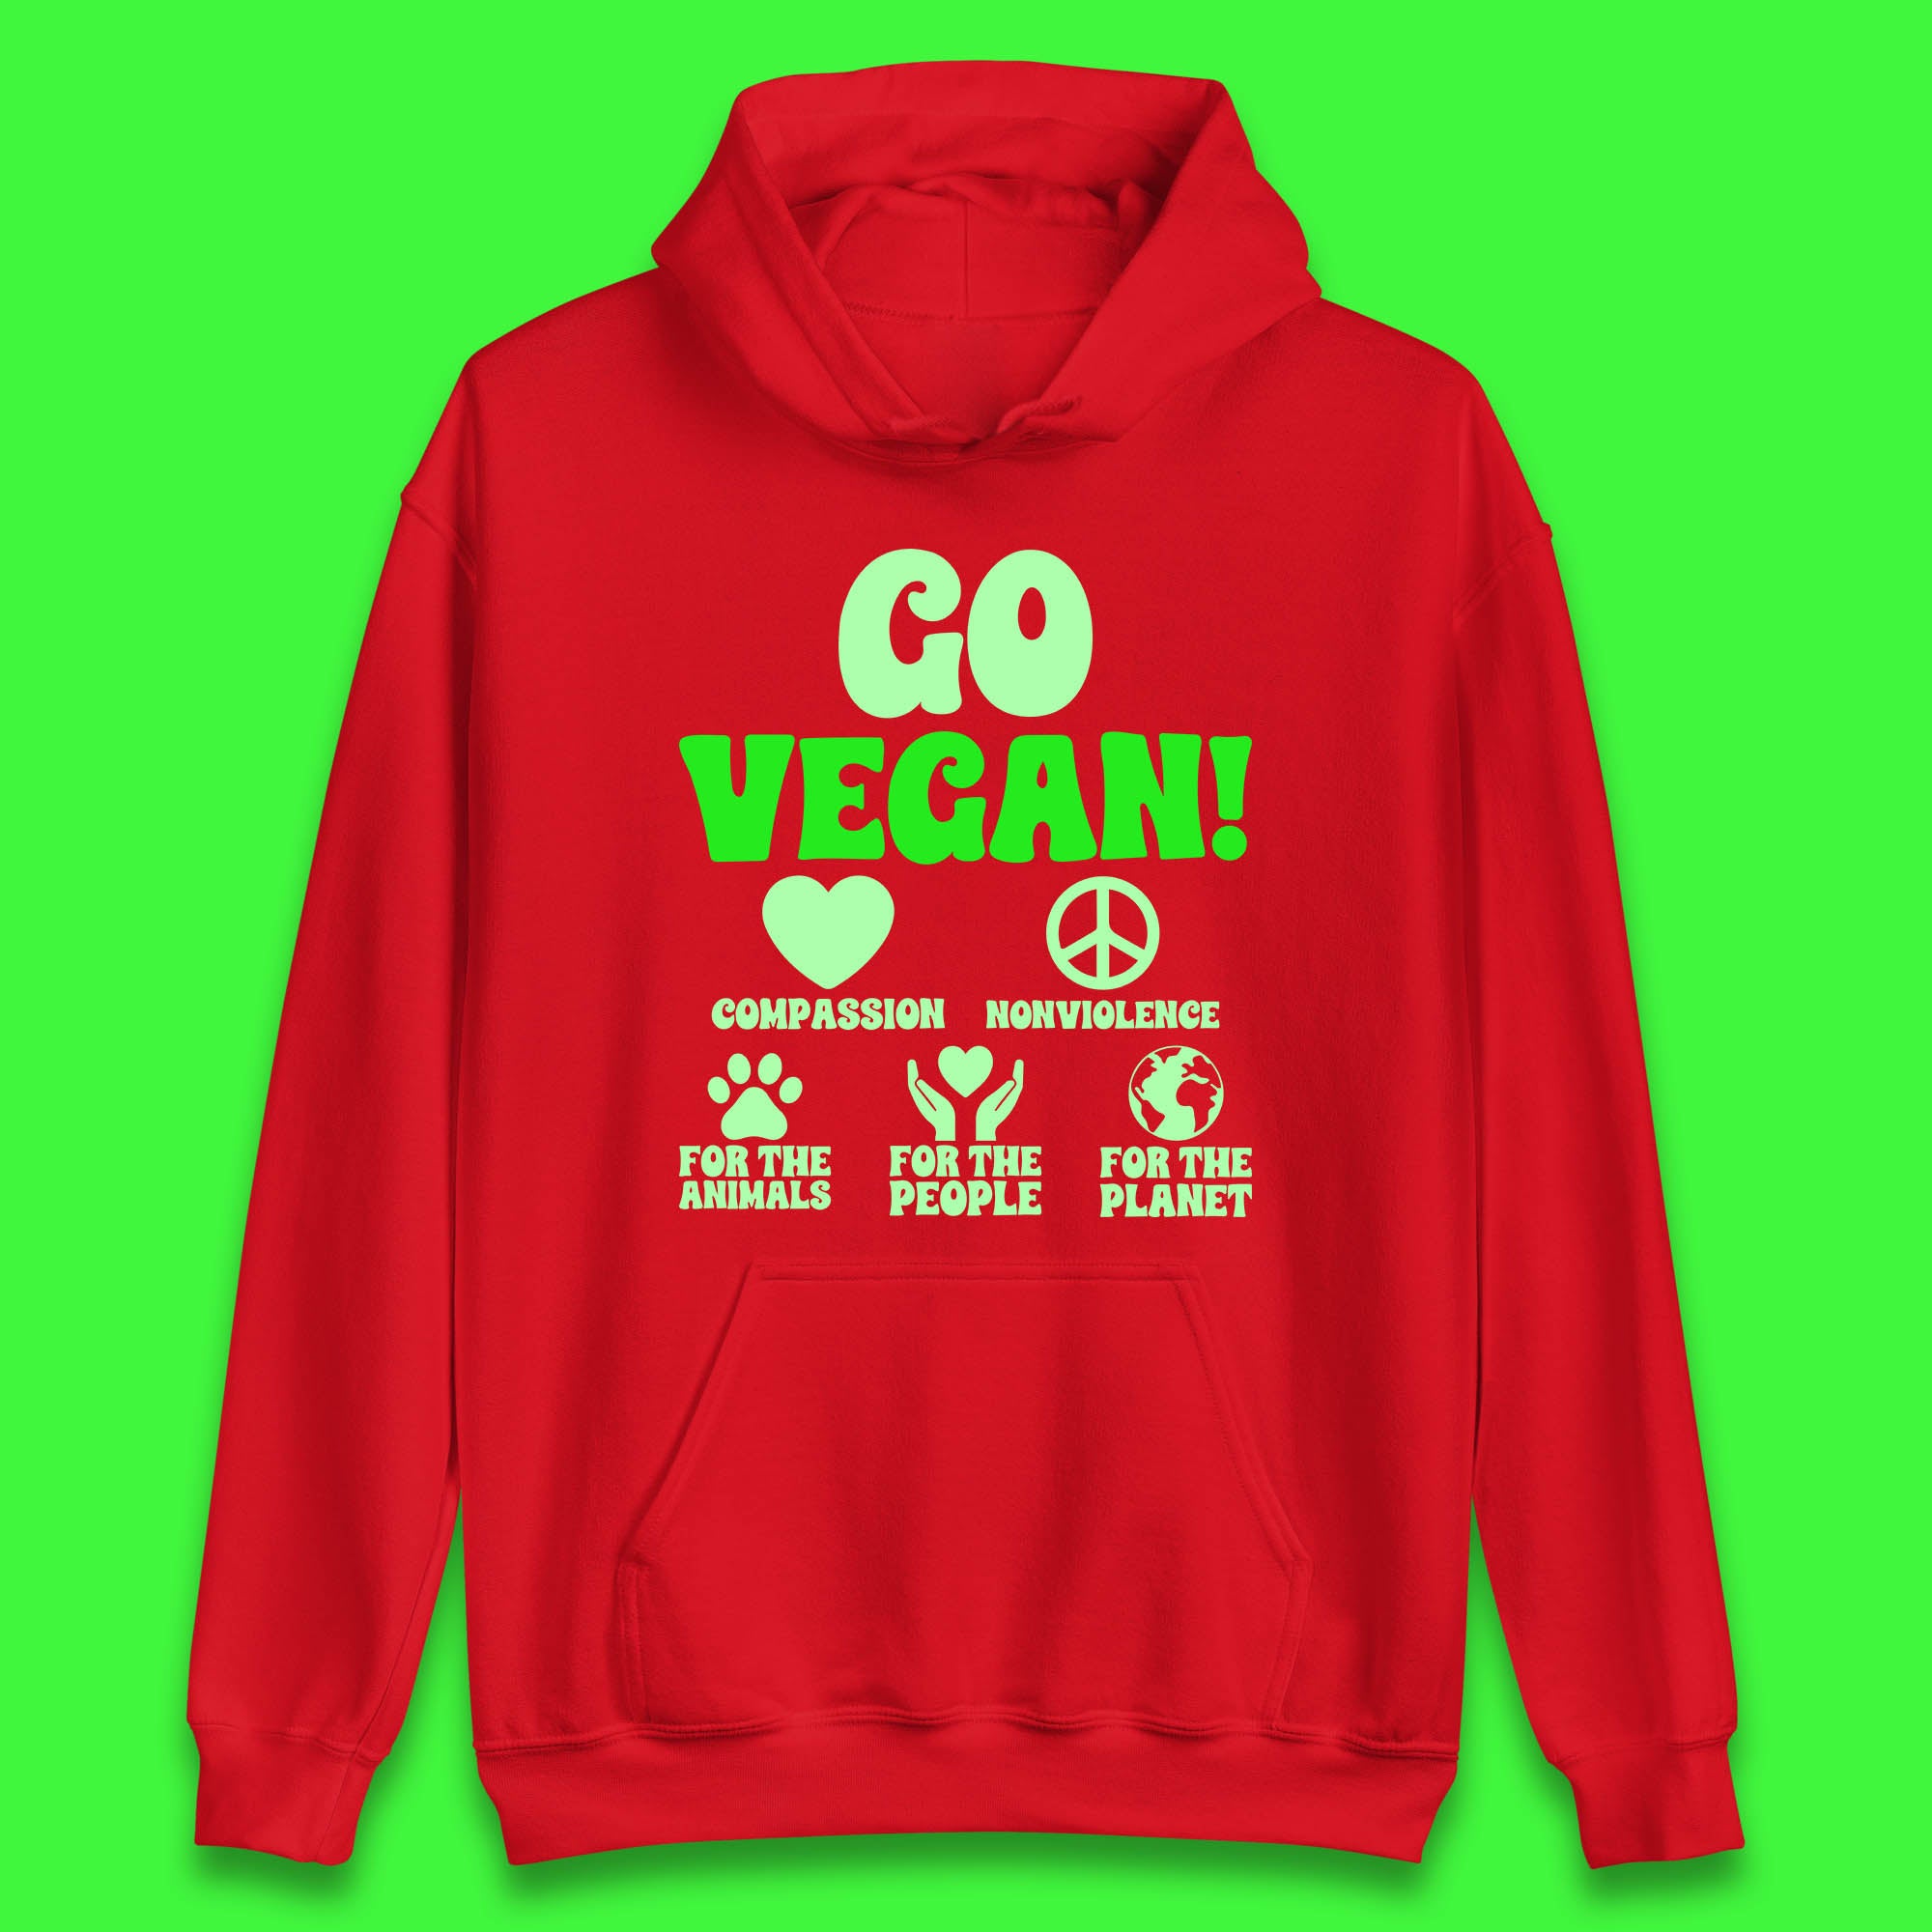 Go Vegan Compassion Nonviolence For The Animals For The People For The Planet Unisex Hoodie